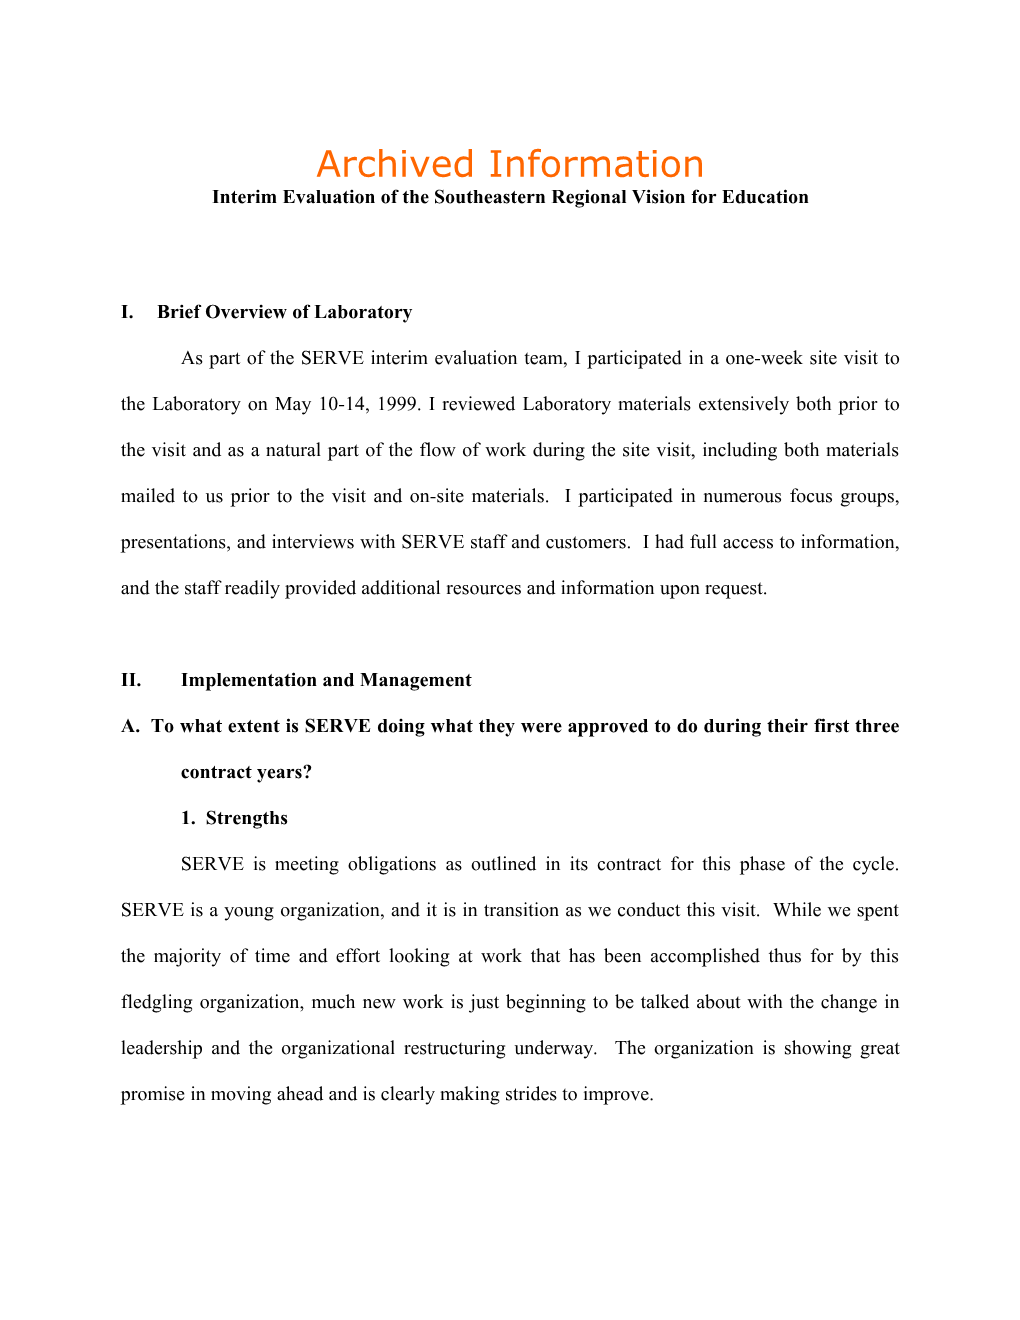 Archived: II Implementation and Management: a (MS Word)